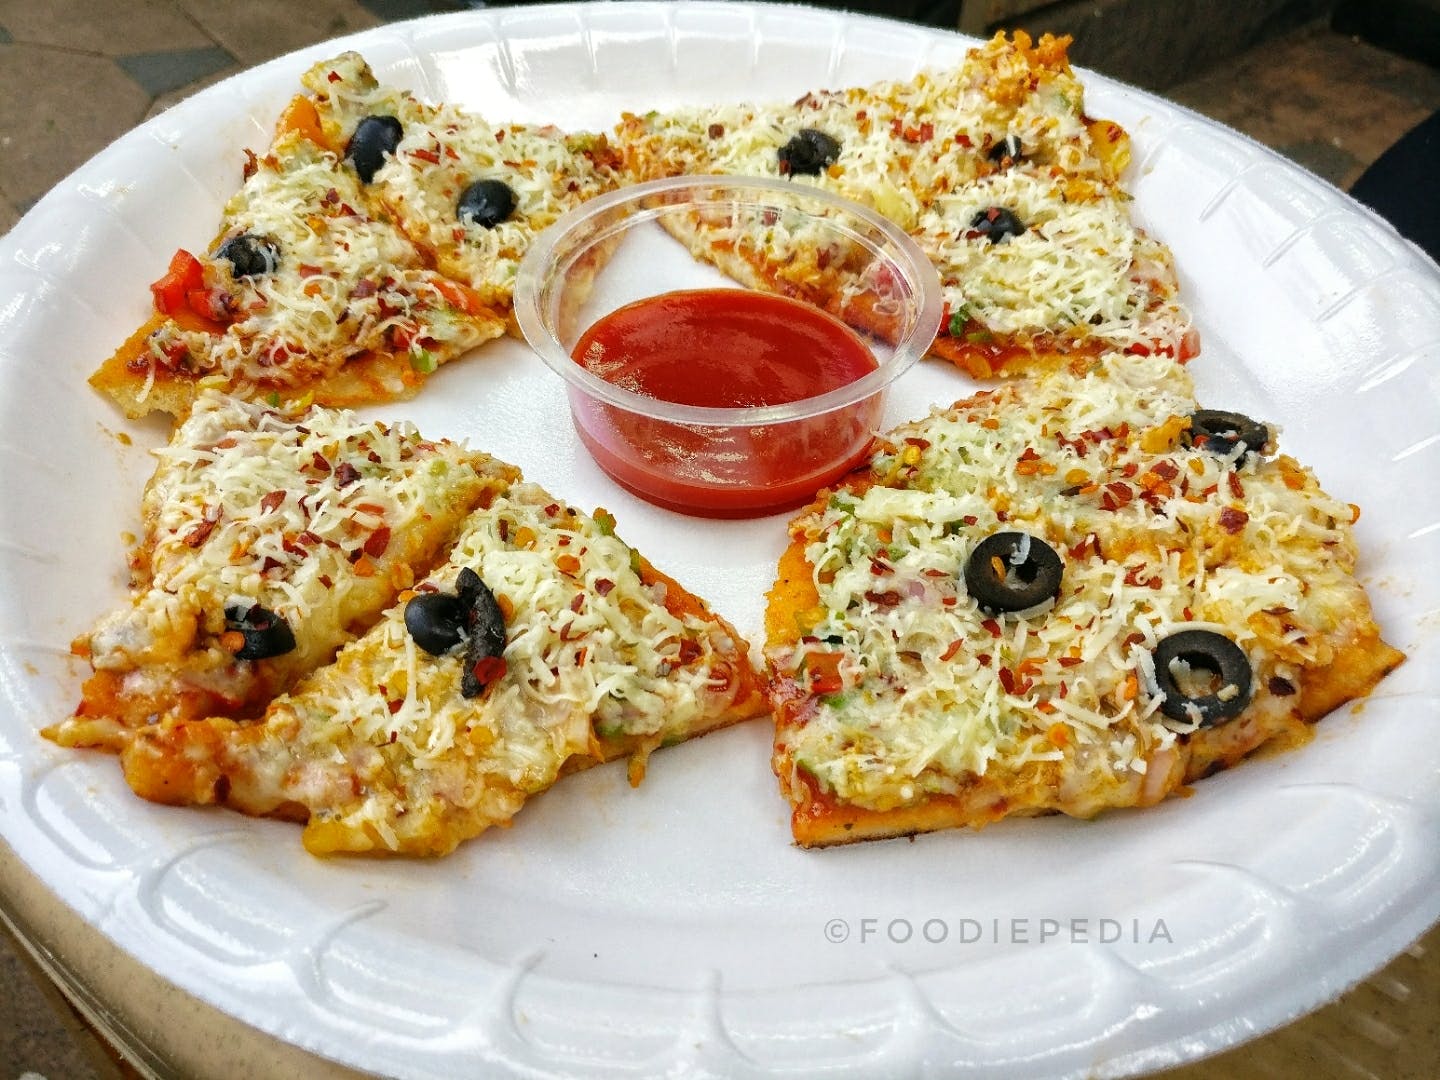 Dish,Food,Cuisine,Ingredient,Meal,Pizza,Pizza cheese,Breakfast,Produce,Staple food